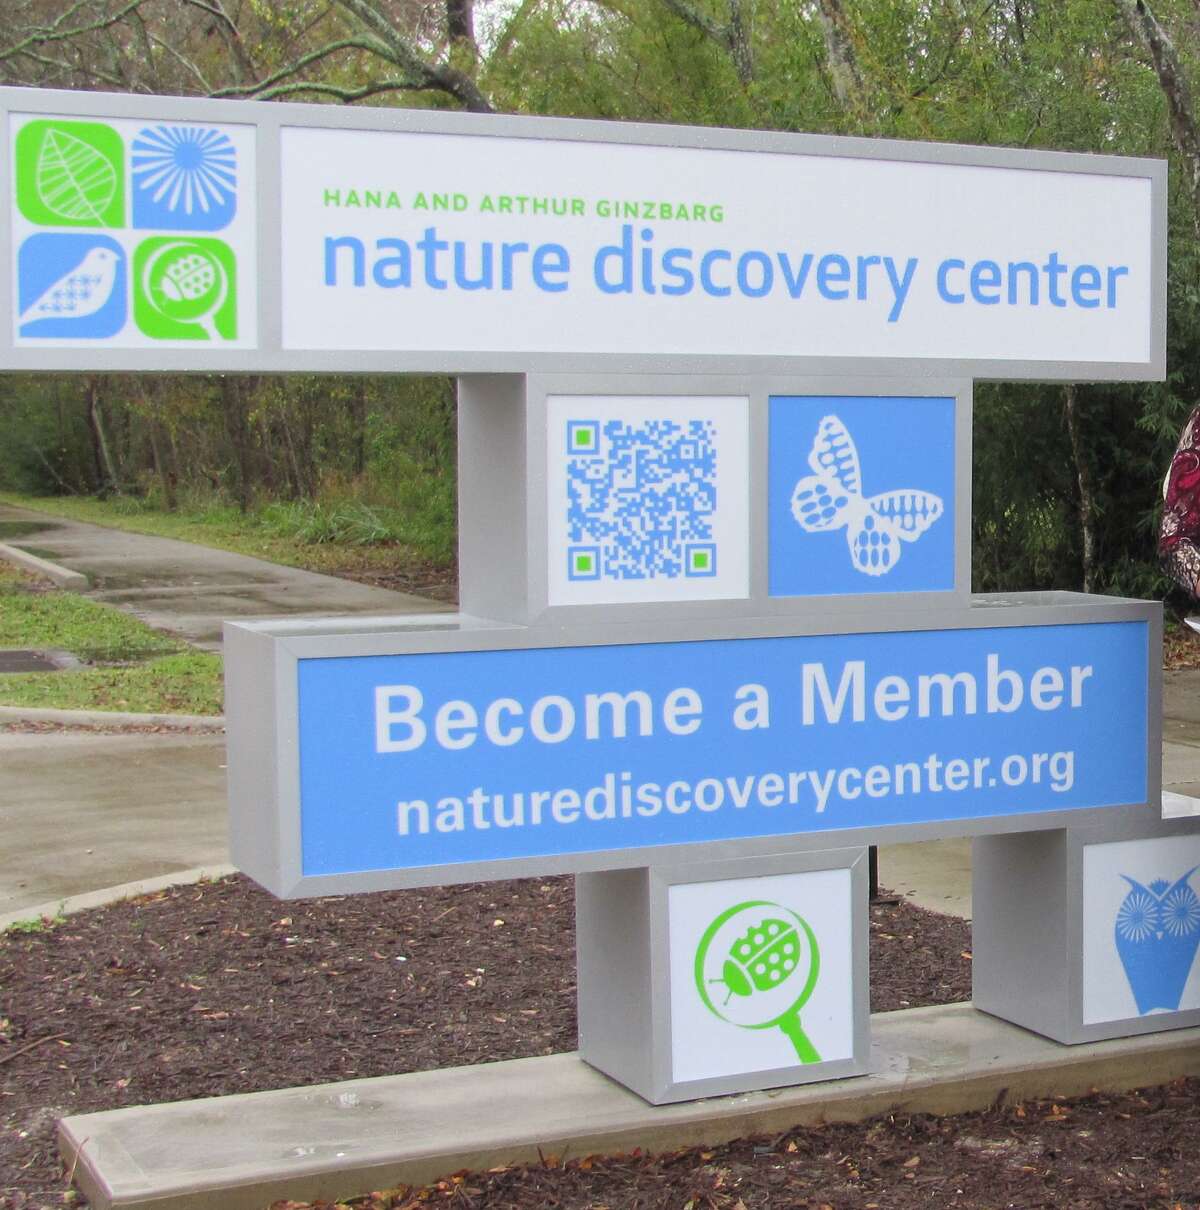 Nature Discovery Center Twilight Gala is scheduled for 6-10 p.m. Friday, May 6, at 7112 Newcastle St. in Bellaire. The 27th Annual Twilight Gala “Back to Mother Nature” benefits Hana and Arthur Ginzbarg Nature Discover Center. For more information, including tickets, go to https://tinyurl.com/3mtek555.